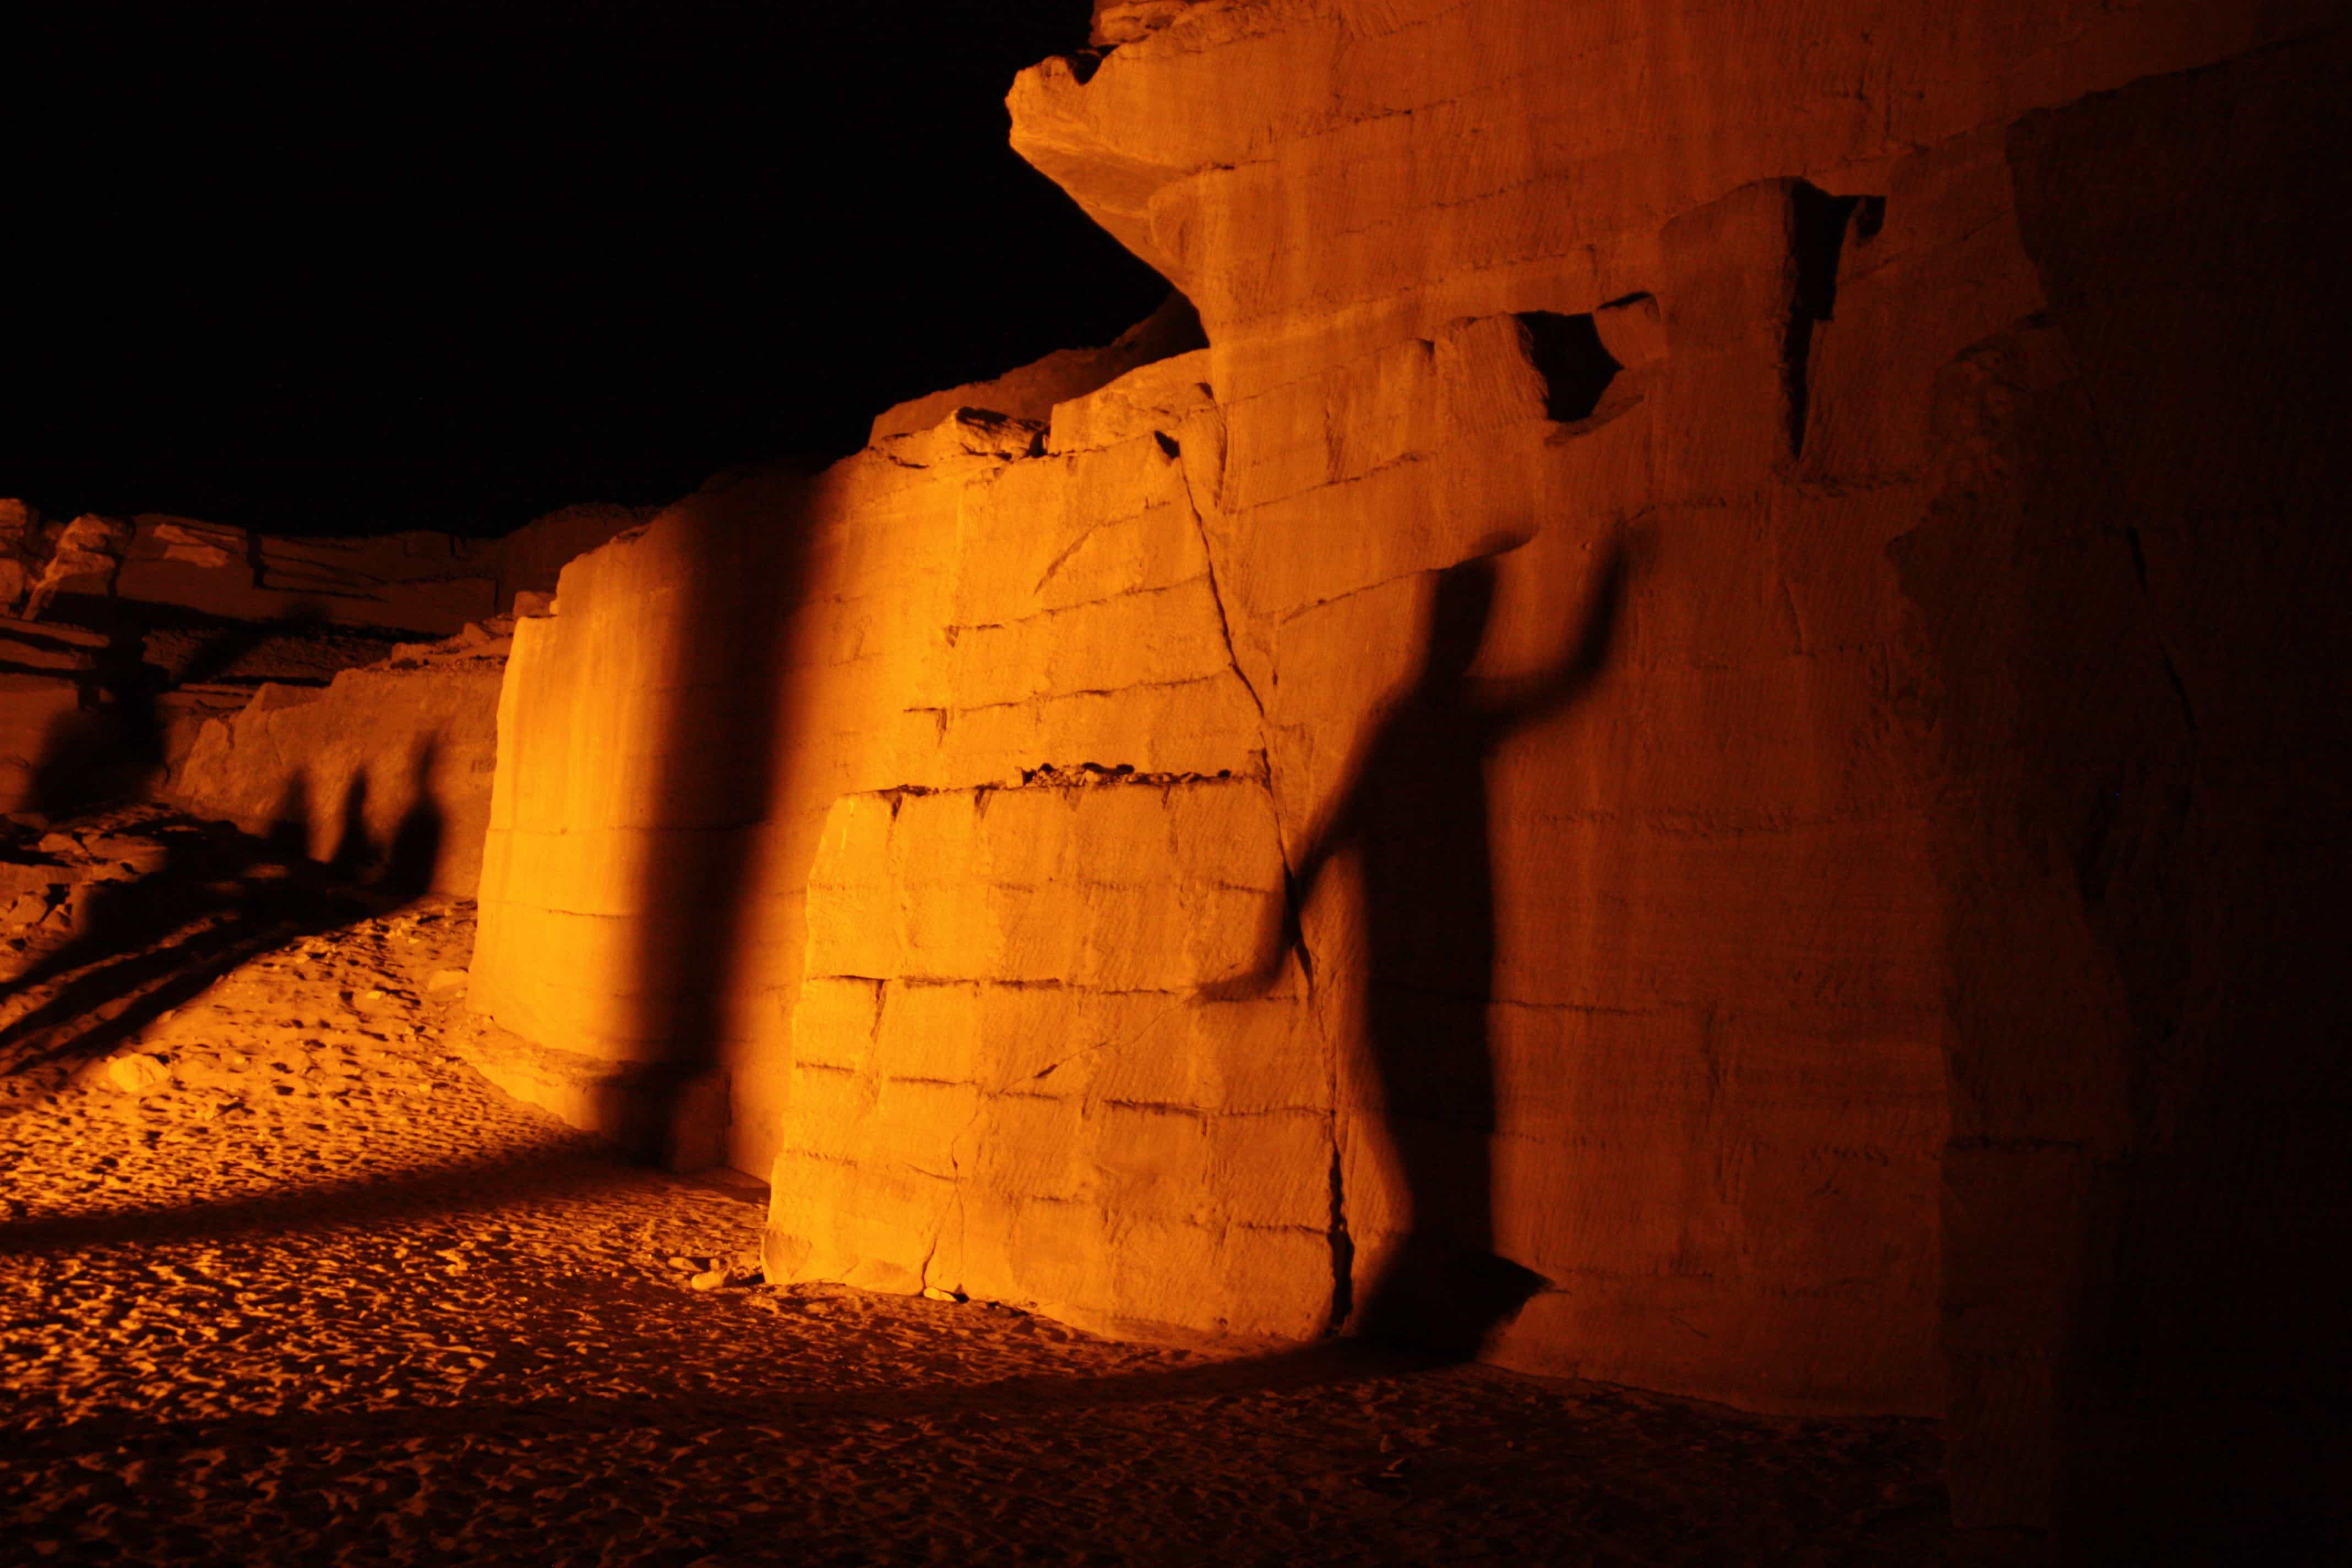 Shadows on the quarry walls at Gebel Silsila, Egypt